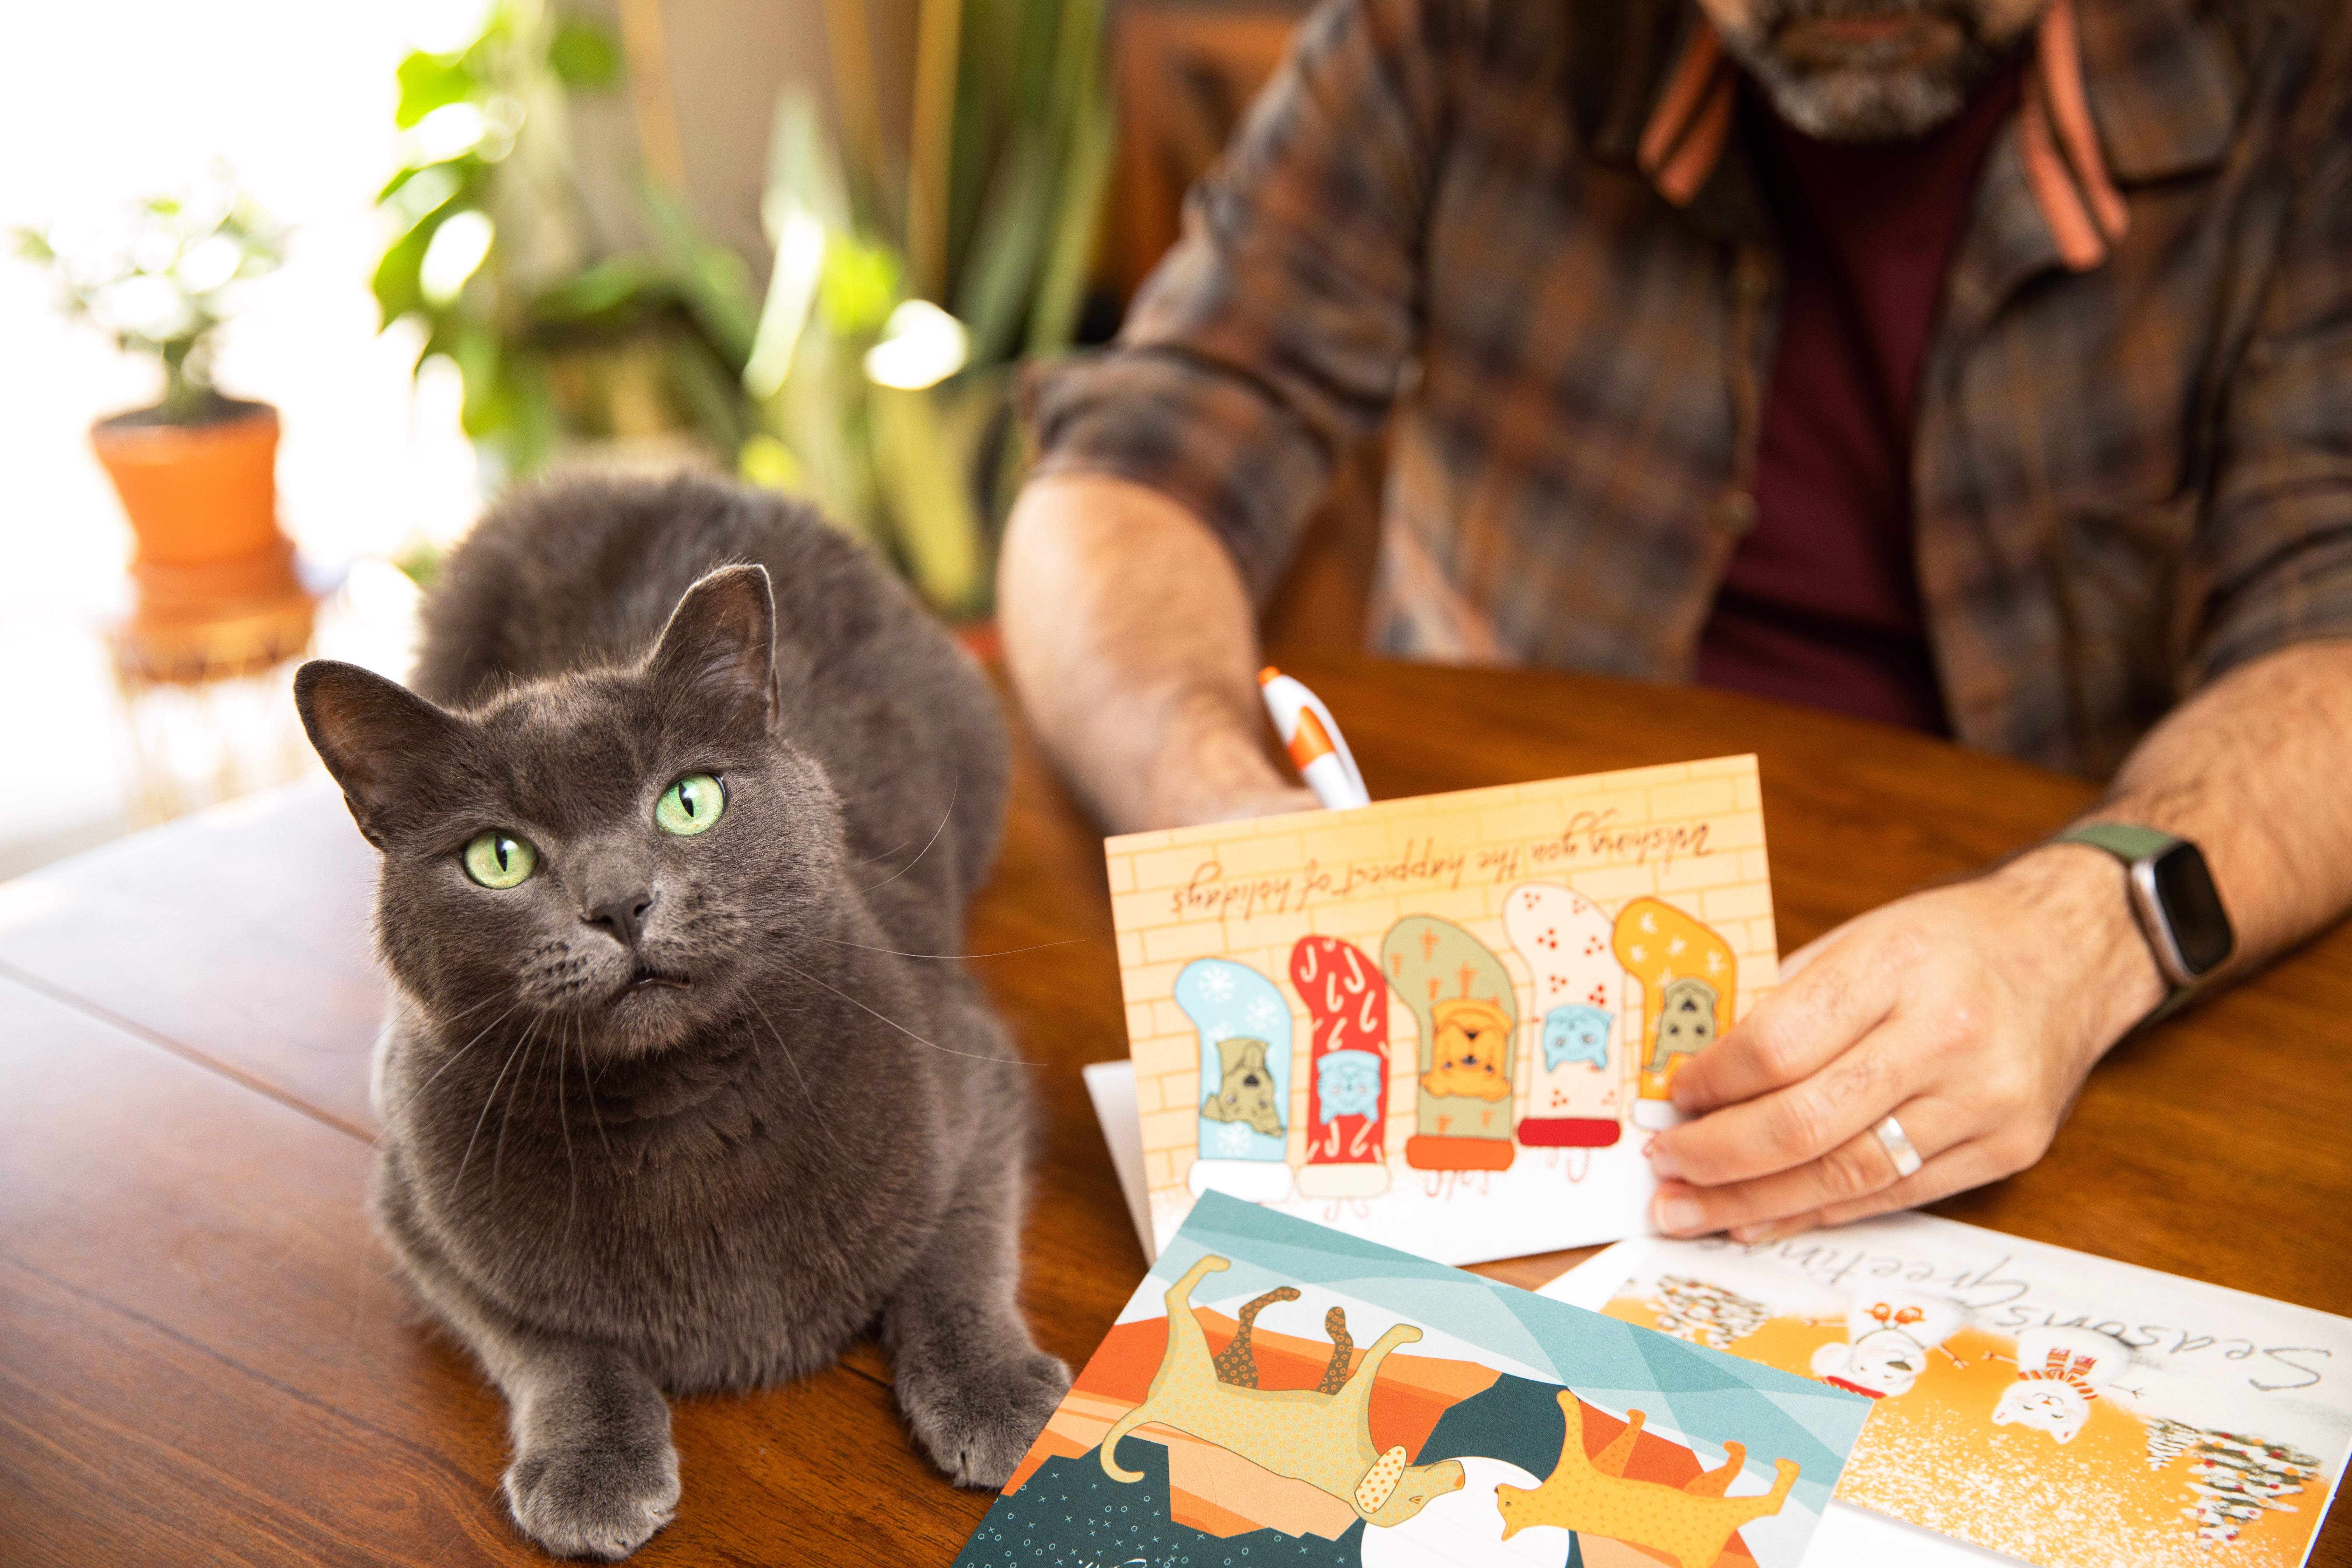 Person writing holiday cards with a cat sitting next to the cards on the table